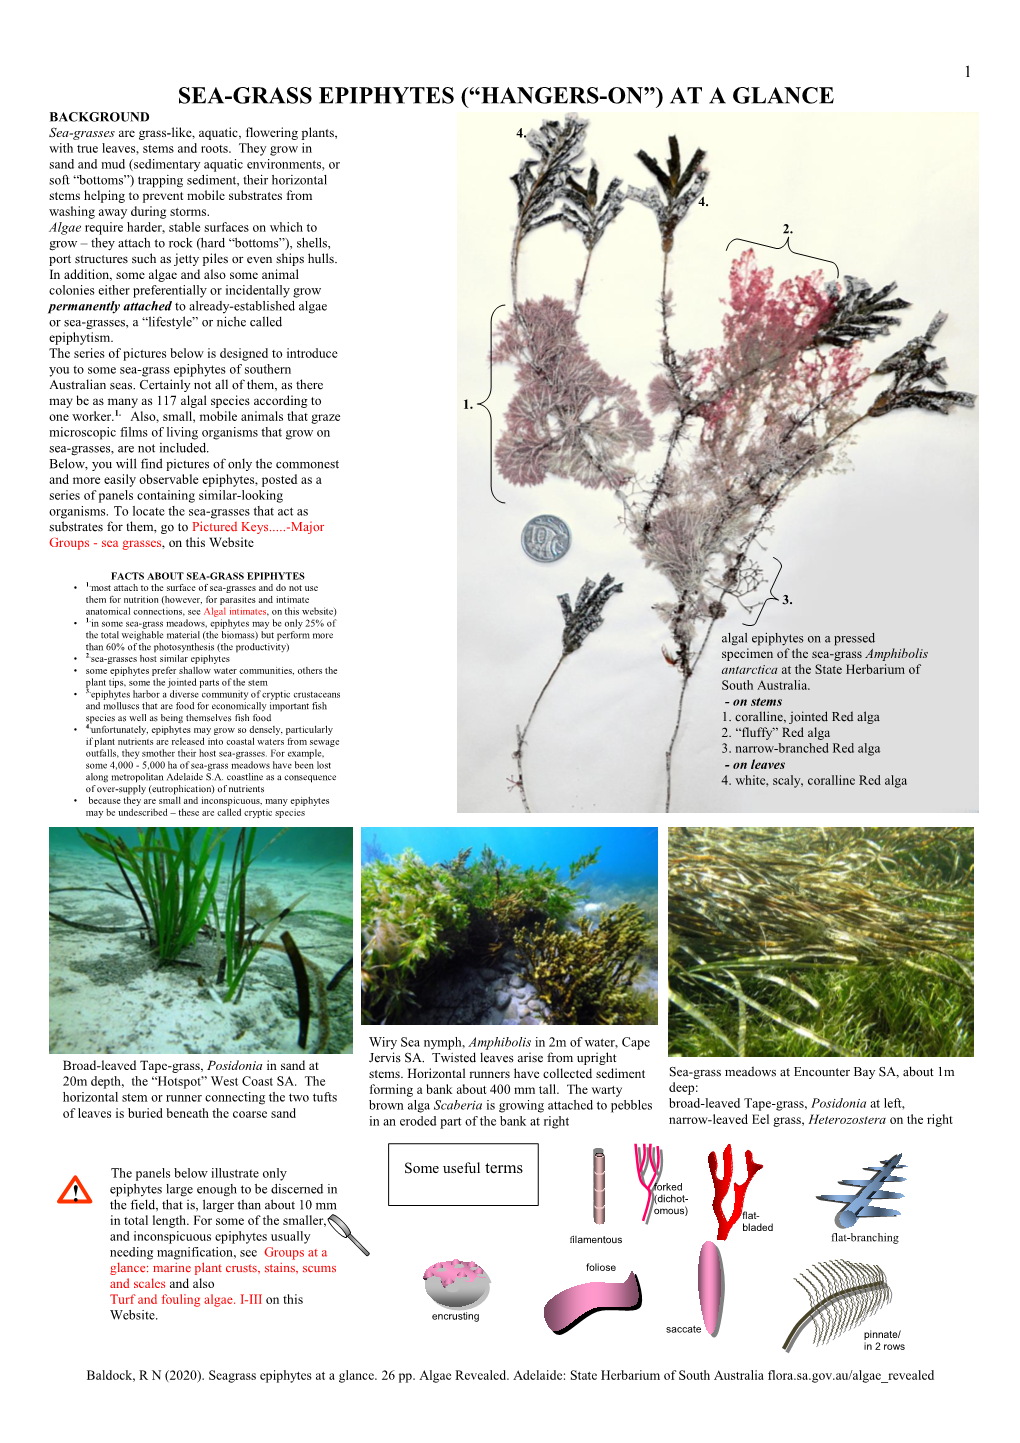 Seagrass Epiphytes at a Glance